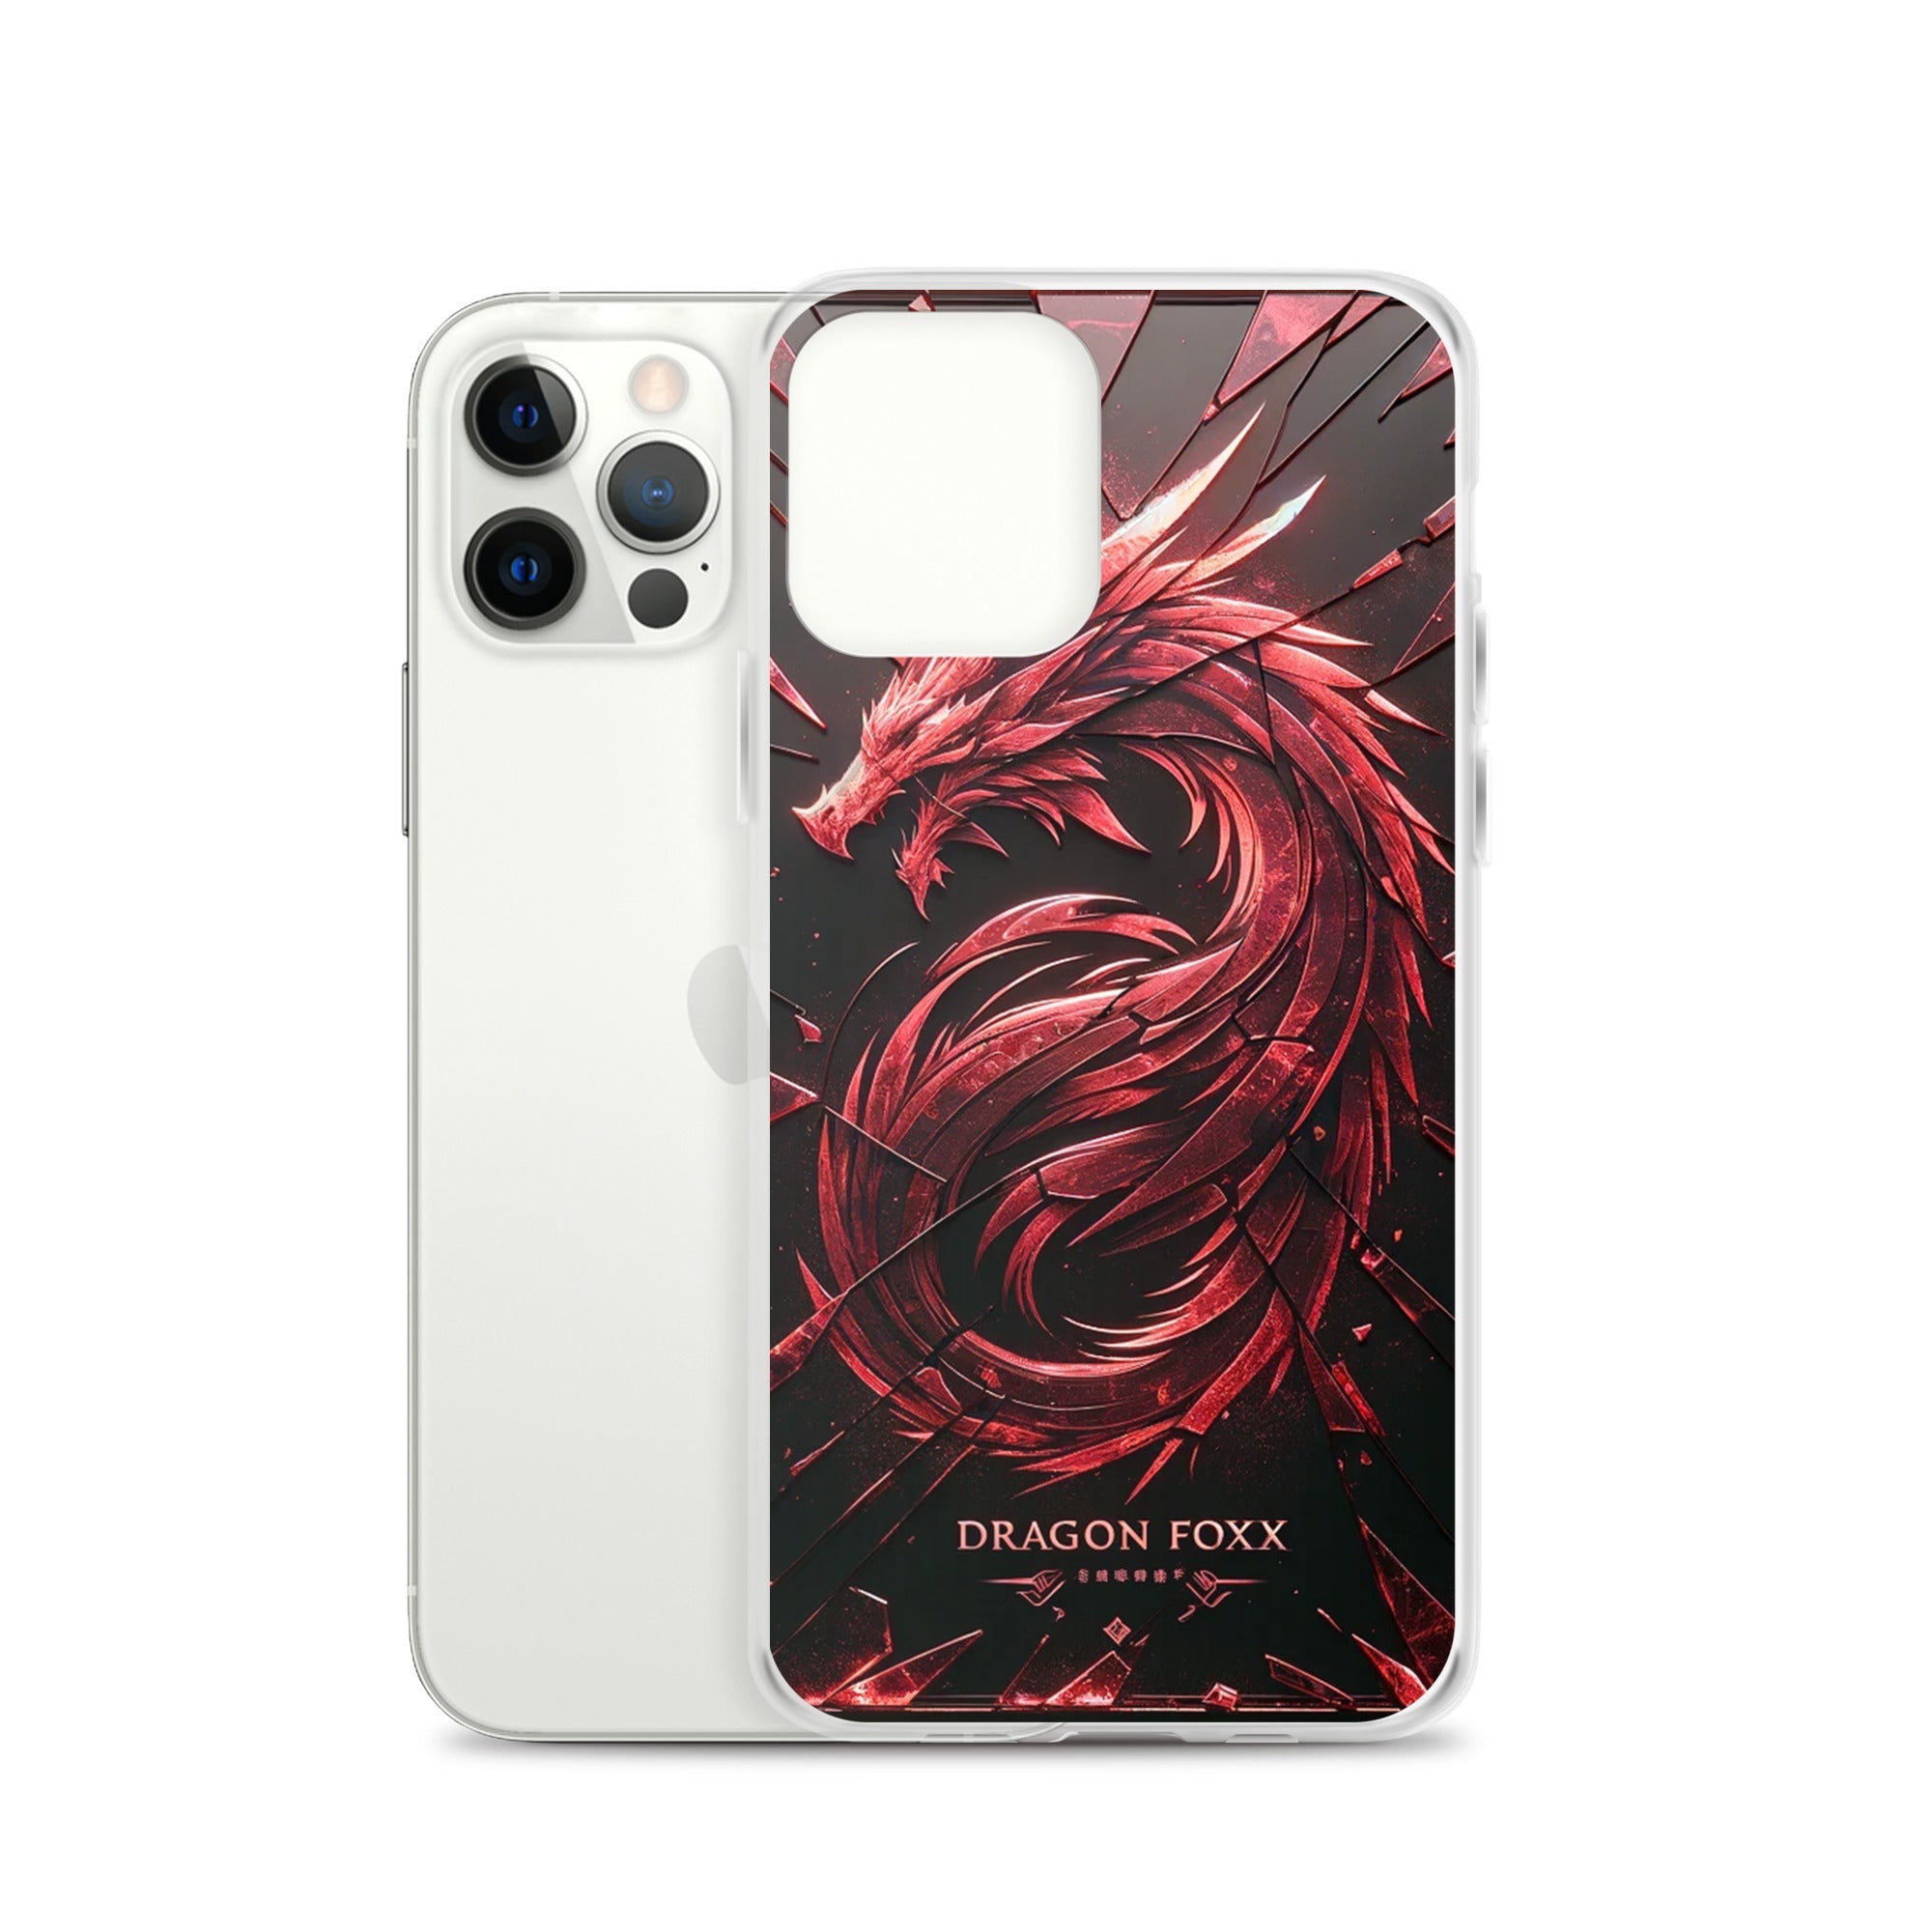 DRAGON FOXX™ Red Dragon Phone Case for iPhone® - Phone Case for iPhone® - DRAGON FOXX™ - DRAGON FOXX™ Red Dragon Phone Case for iPhone® - 7805351_11808 - iPhone 12 Pro - Red/Black/Clear - Accessories - Dragon Foxx™ - DRAGON FOXX™ Phone Case for iPhone®